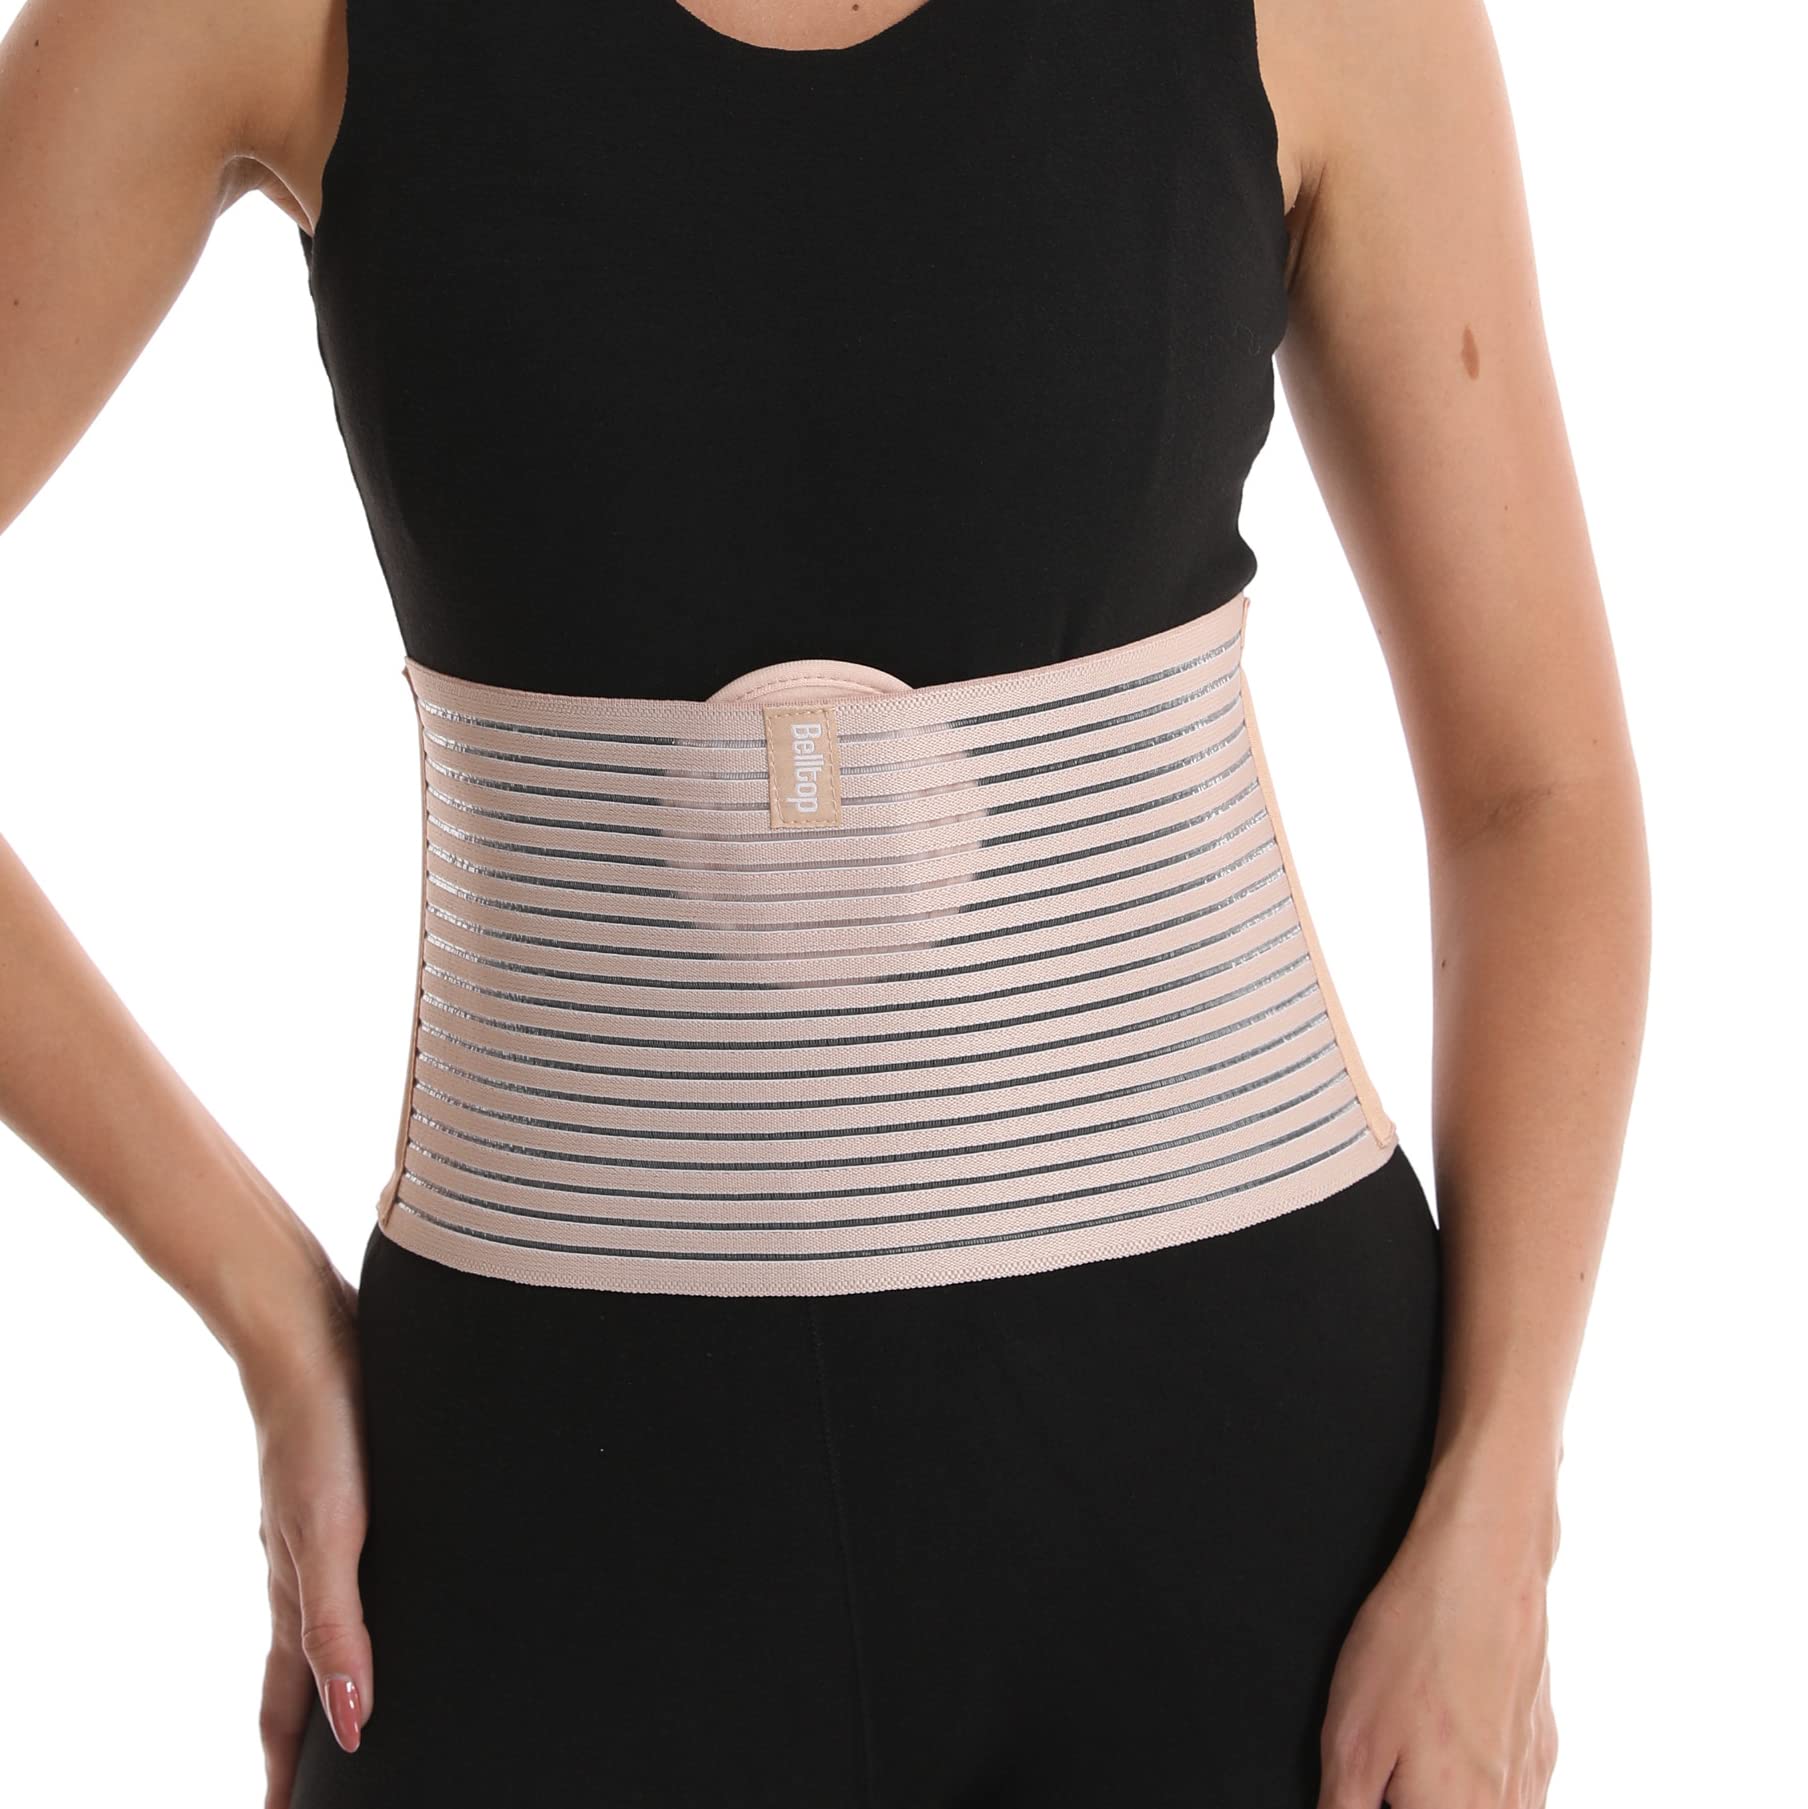 Umbilical Hernia Support Belt for Women. Adjustable Abdominal Hernia Band.  Orthopedic Navel Brace. Comfortable Postpartum Girdle. Ideal for Hernia  Relief (L/XL) L/XL (39 to 52 inch umbilical area)